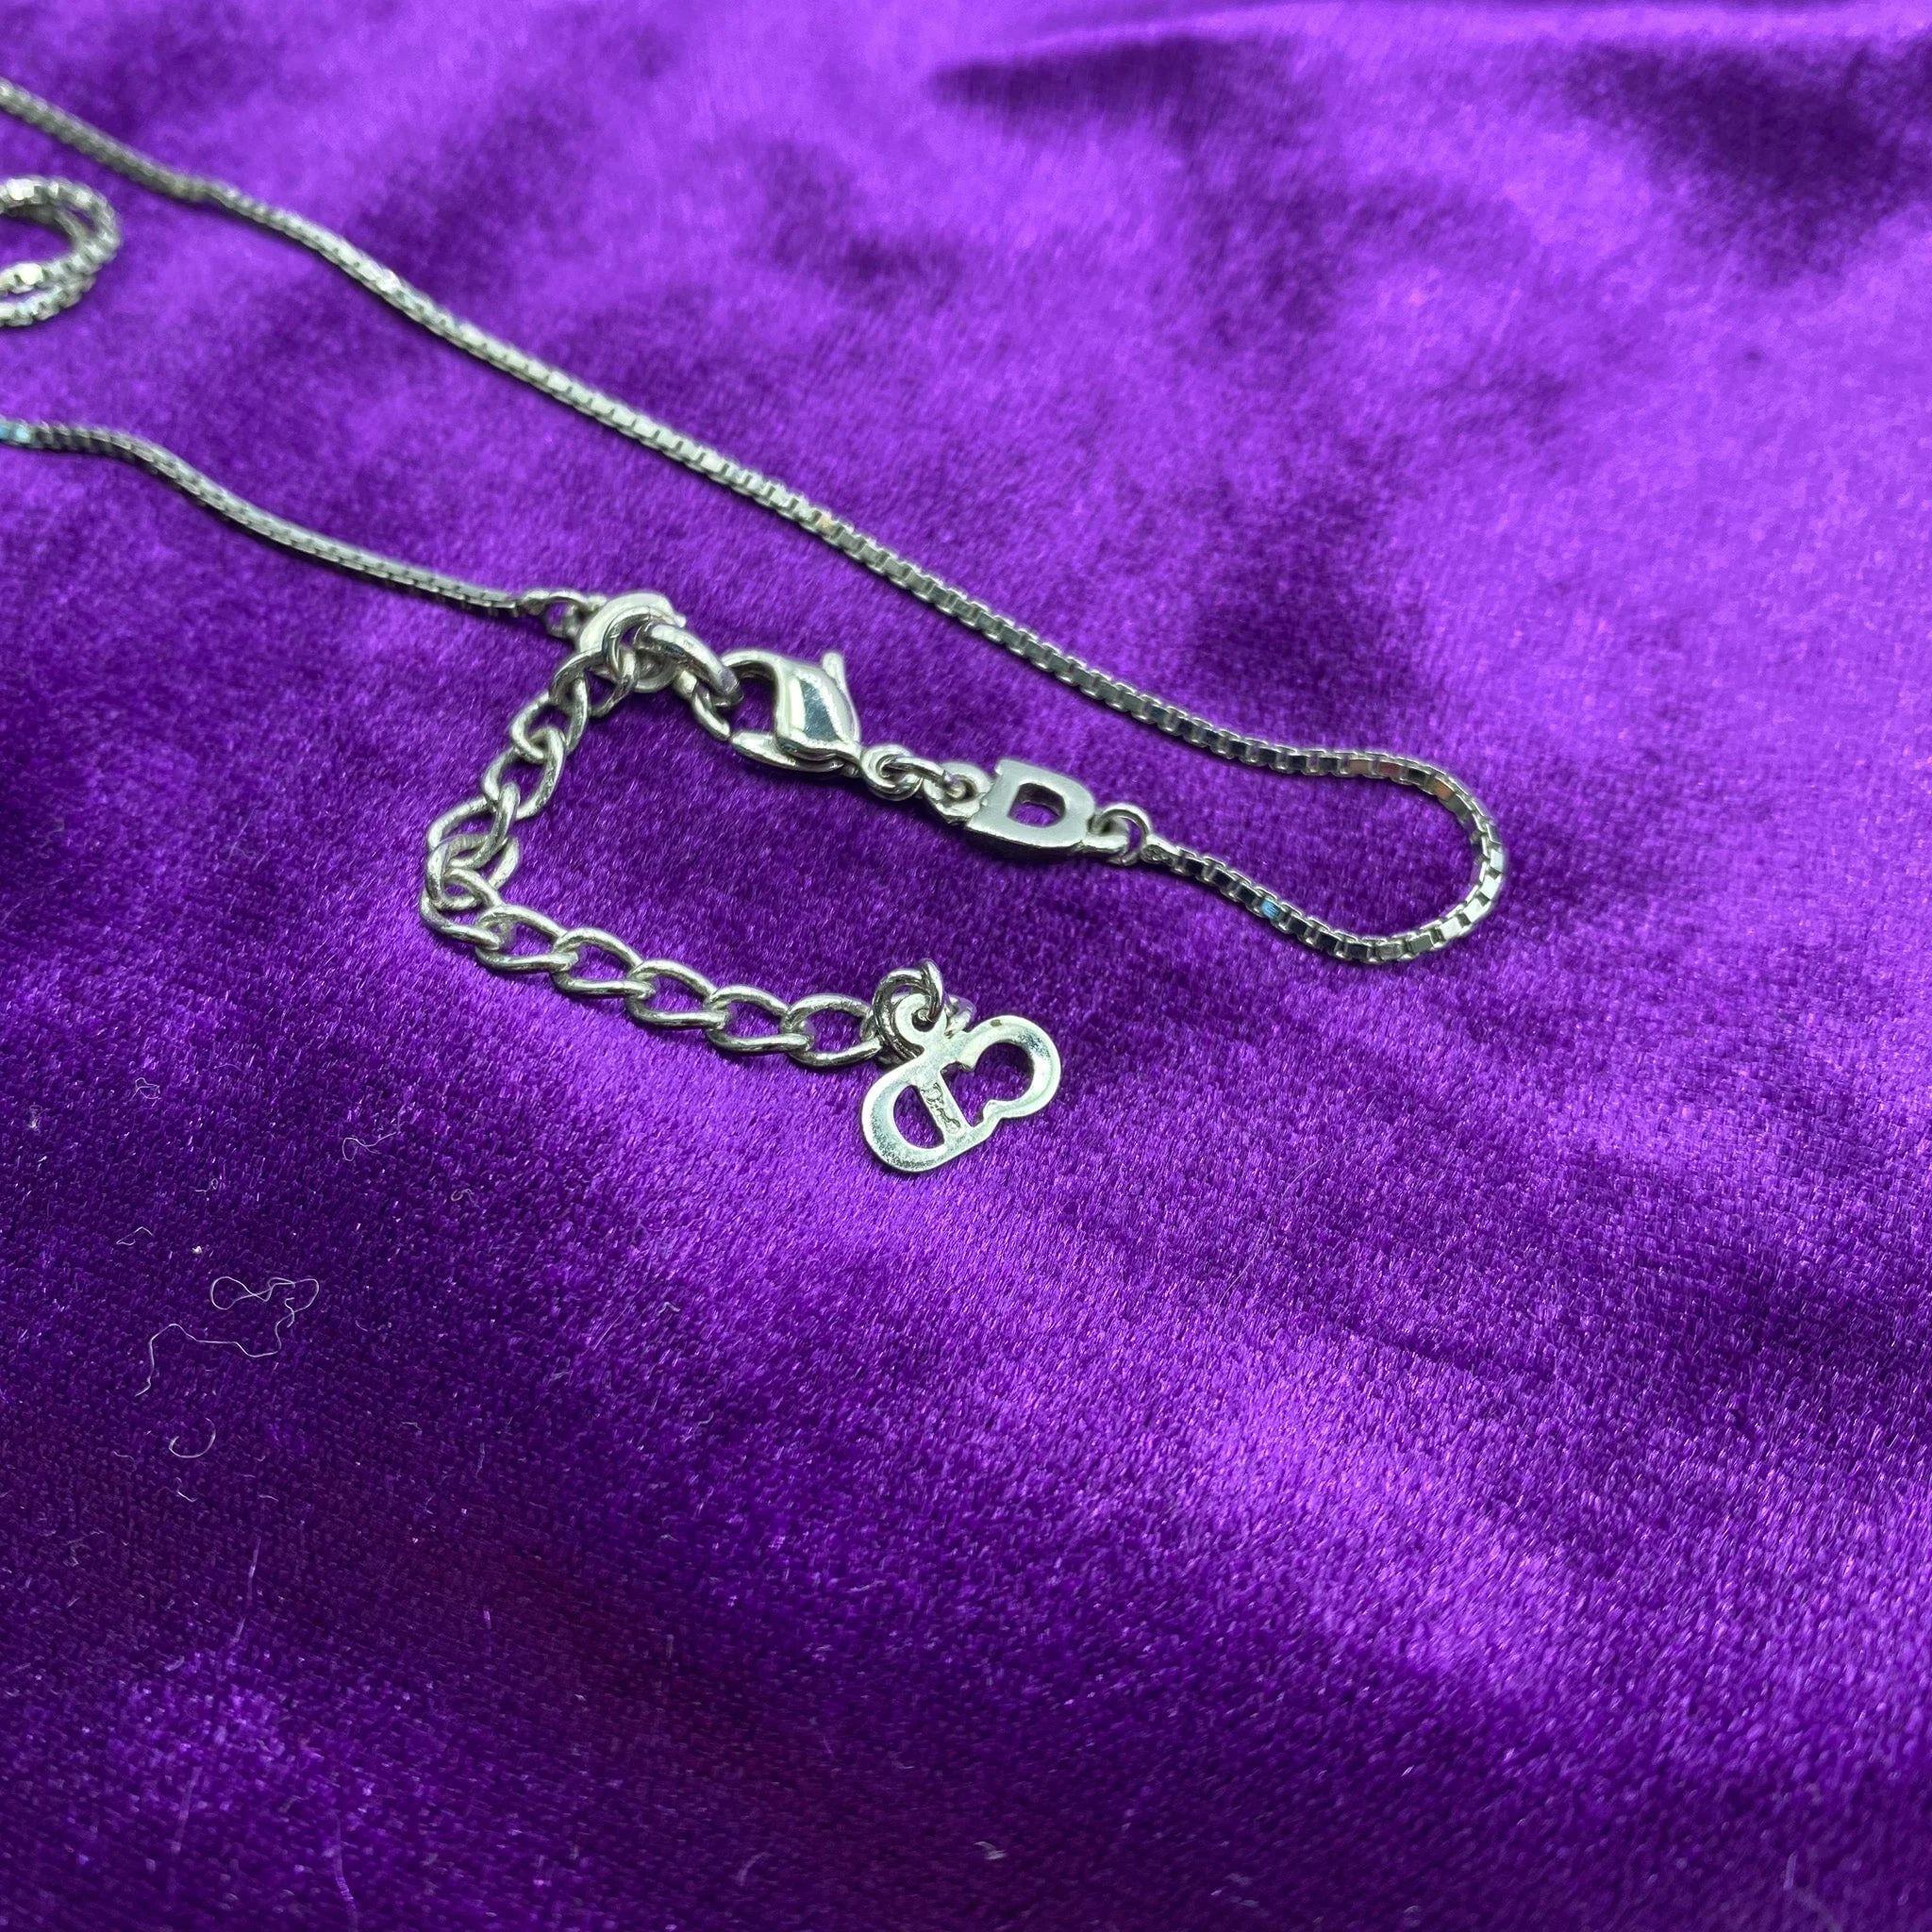 Vintage Dior Necklace Y2K

An iconic John Galliano era Dior piece. Features a silver plated fine box chain with a bronze coloured Dior star pendant.

The Christian Dior aesthetic for timelessly elegant chic originated in the 1940s with the  ‘New